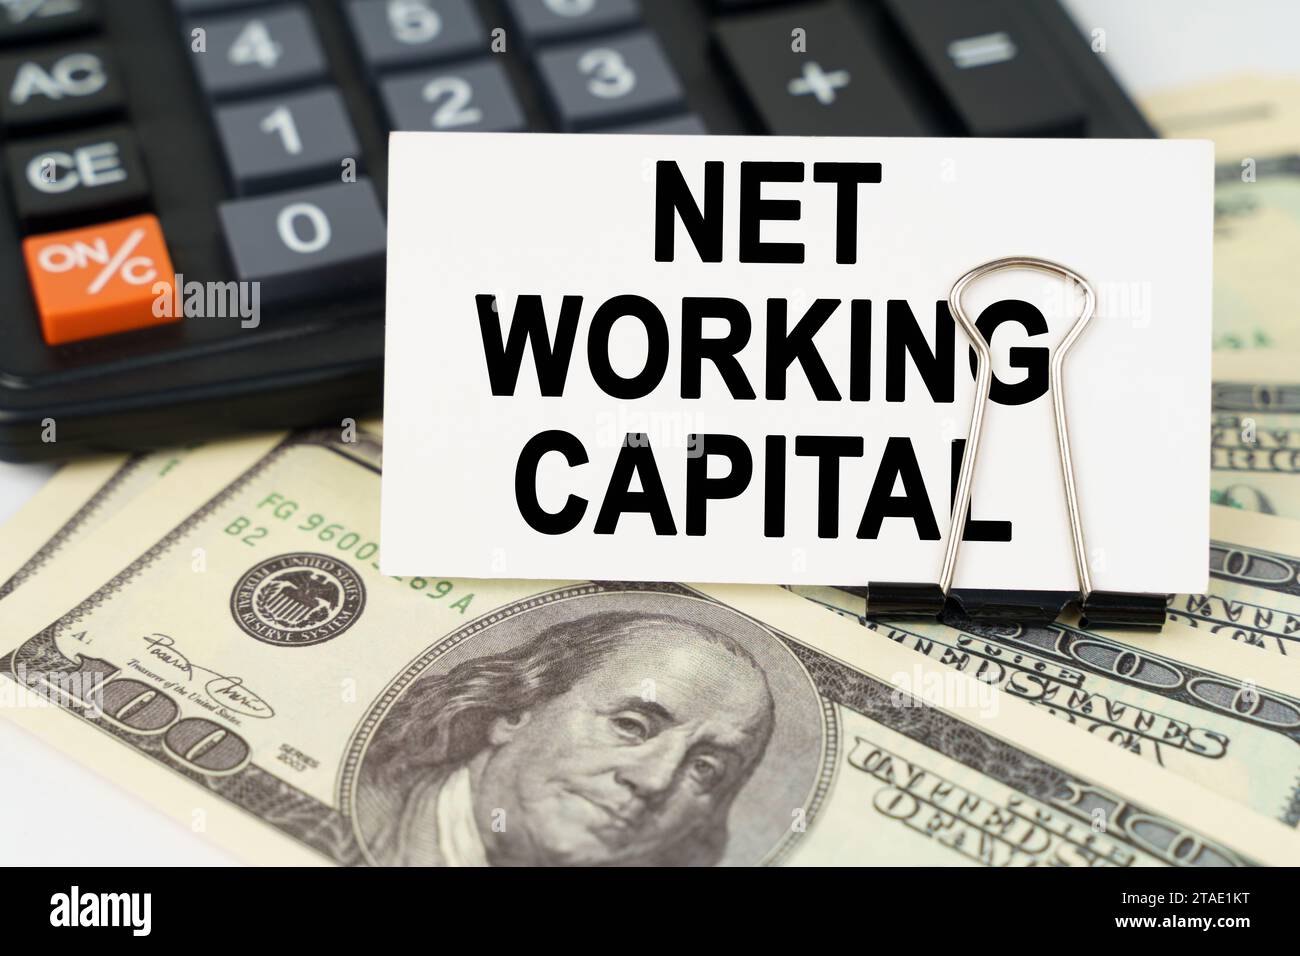 Business concept. On the dollars there is a calculator and a business card with the inscription - NET WORKING CAPITAL Stock Photo